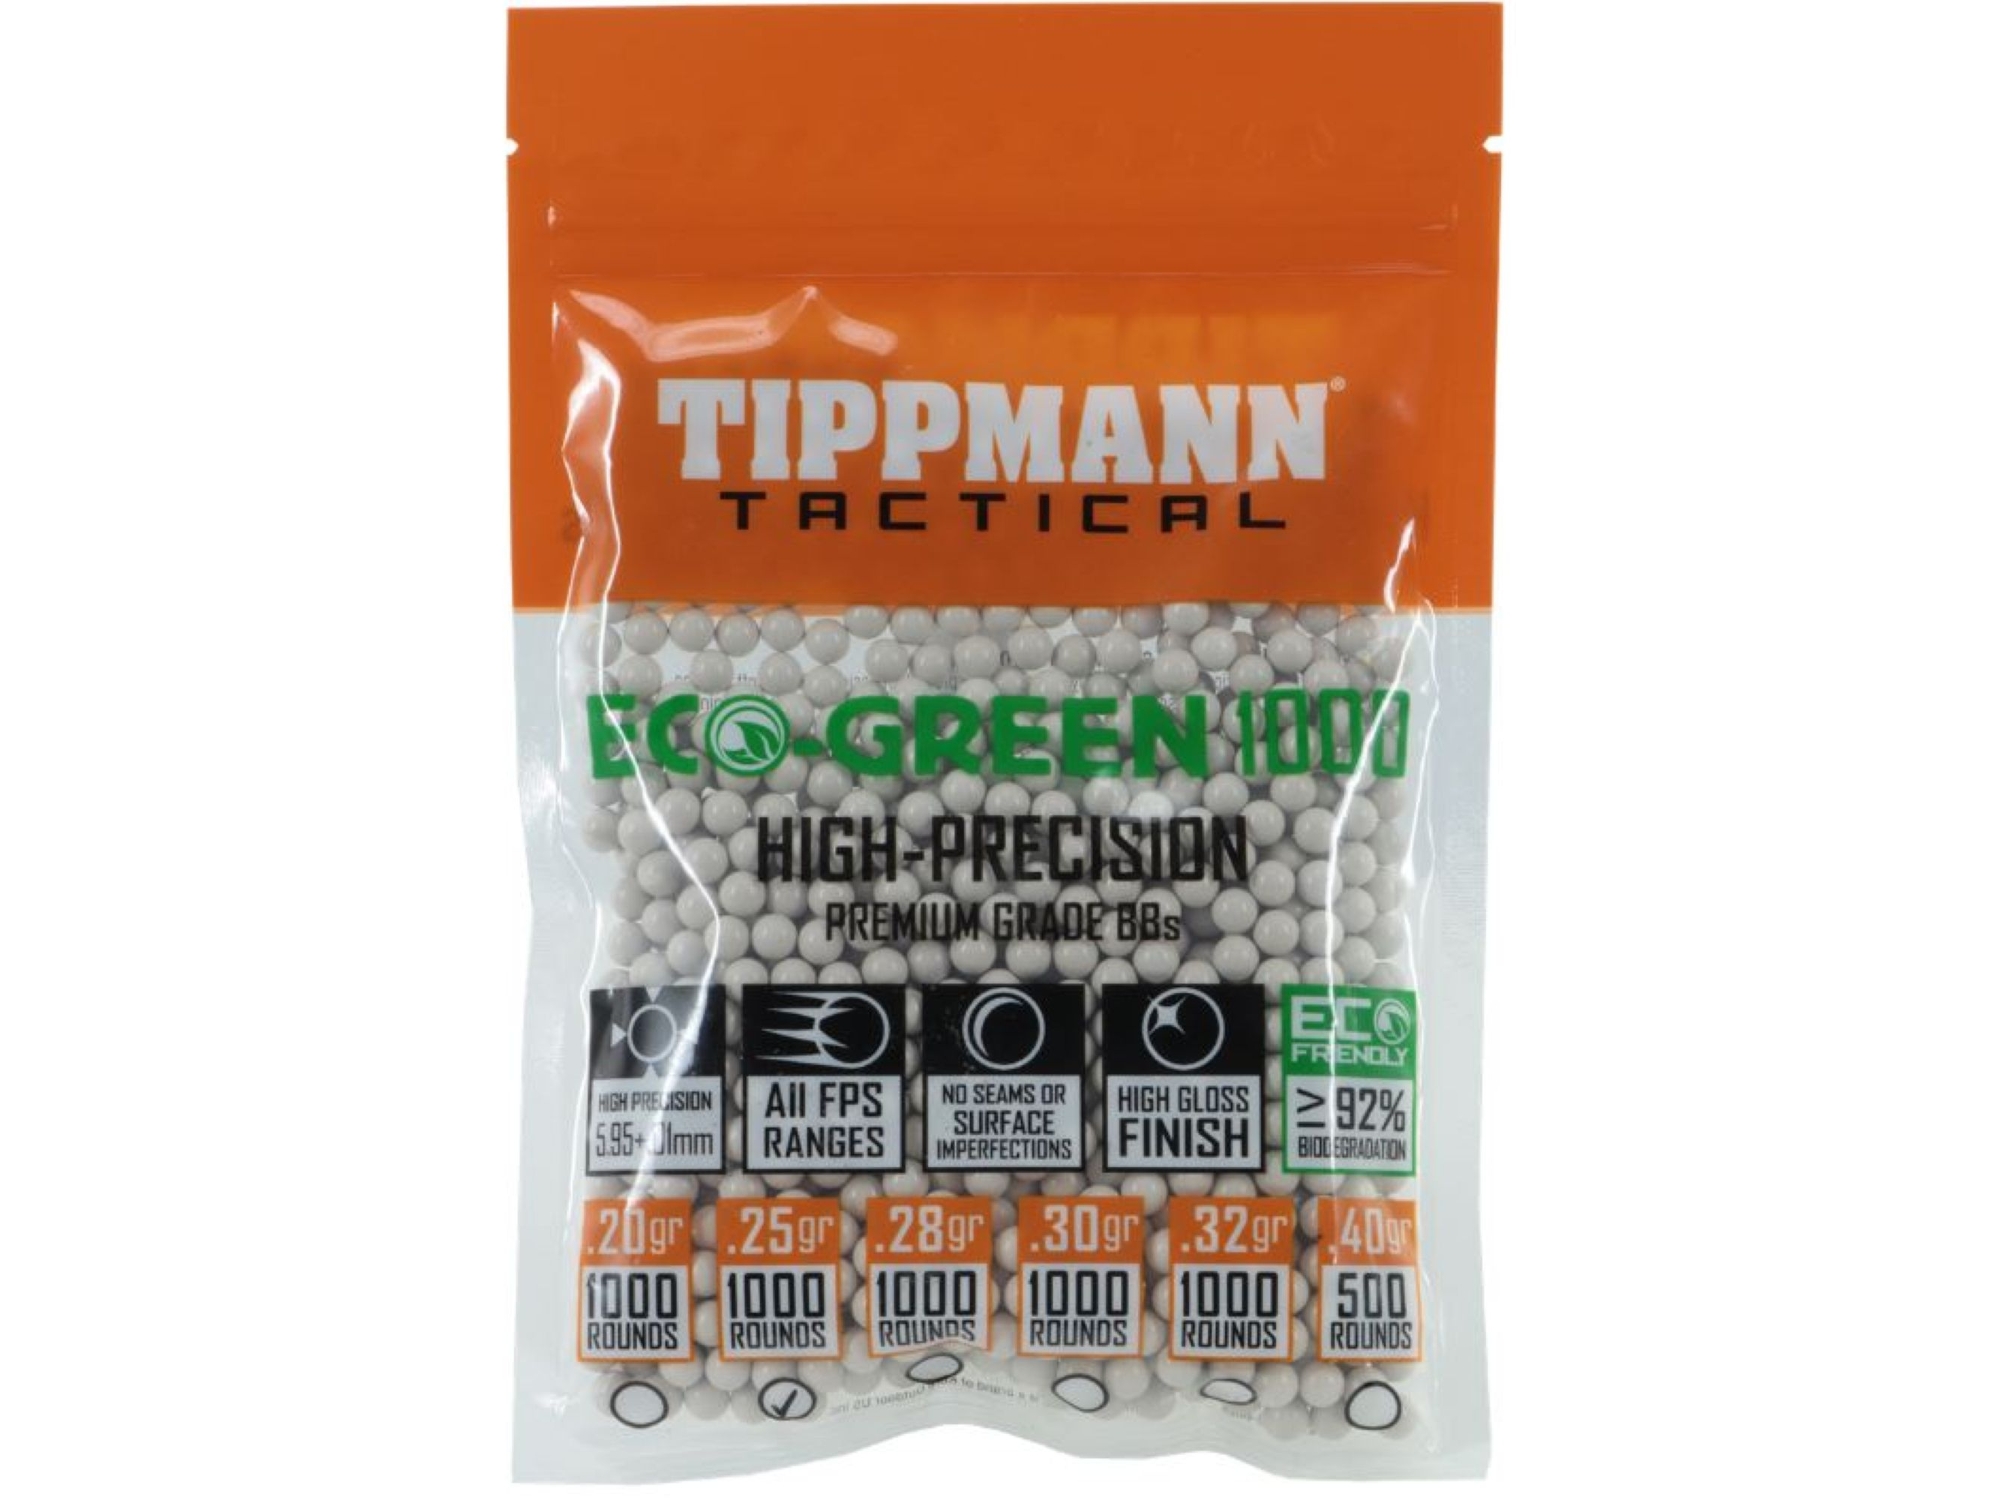 Tippmann Tactical Airsoft BB Eco 1000ct .25g White, 6mm, 1000 count